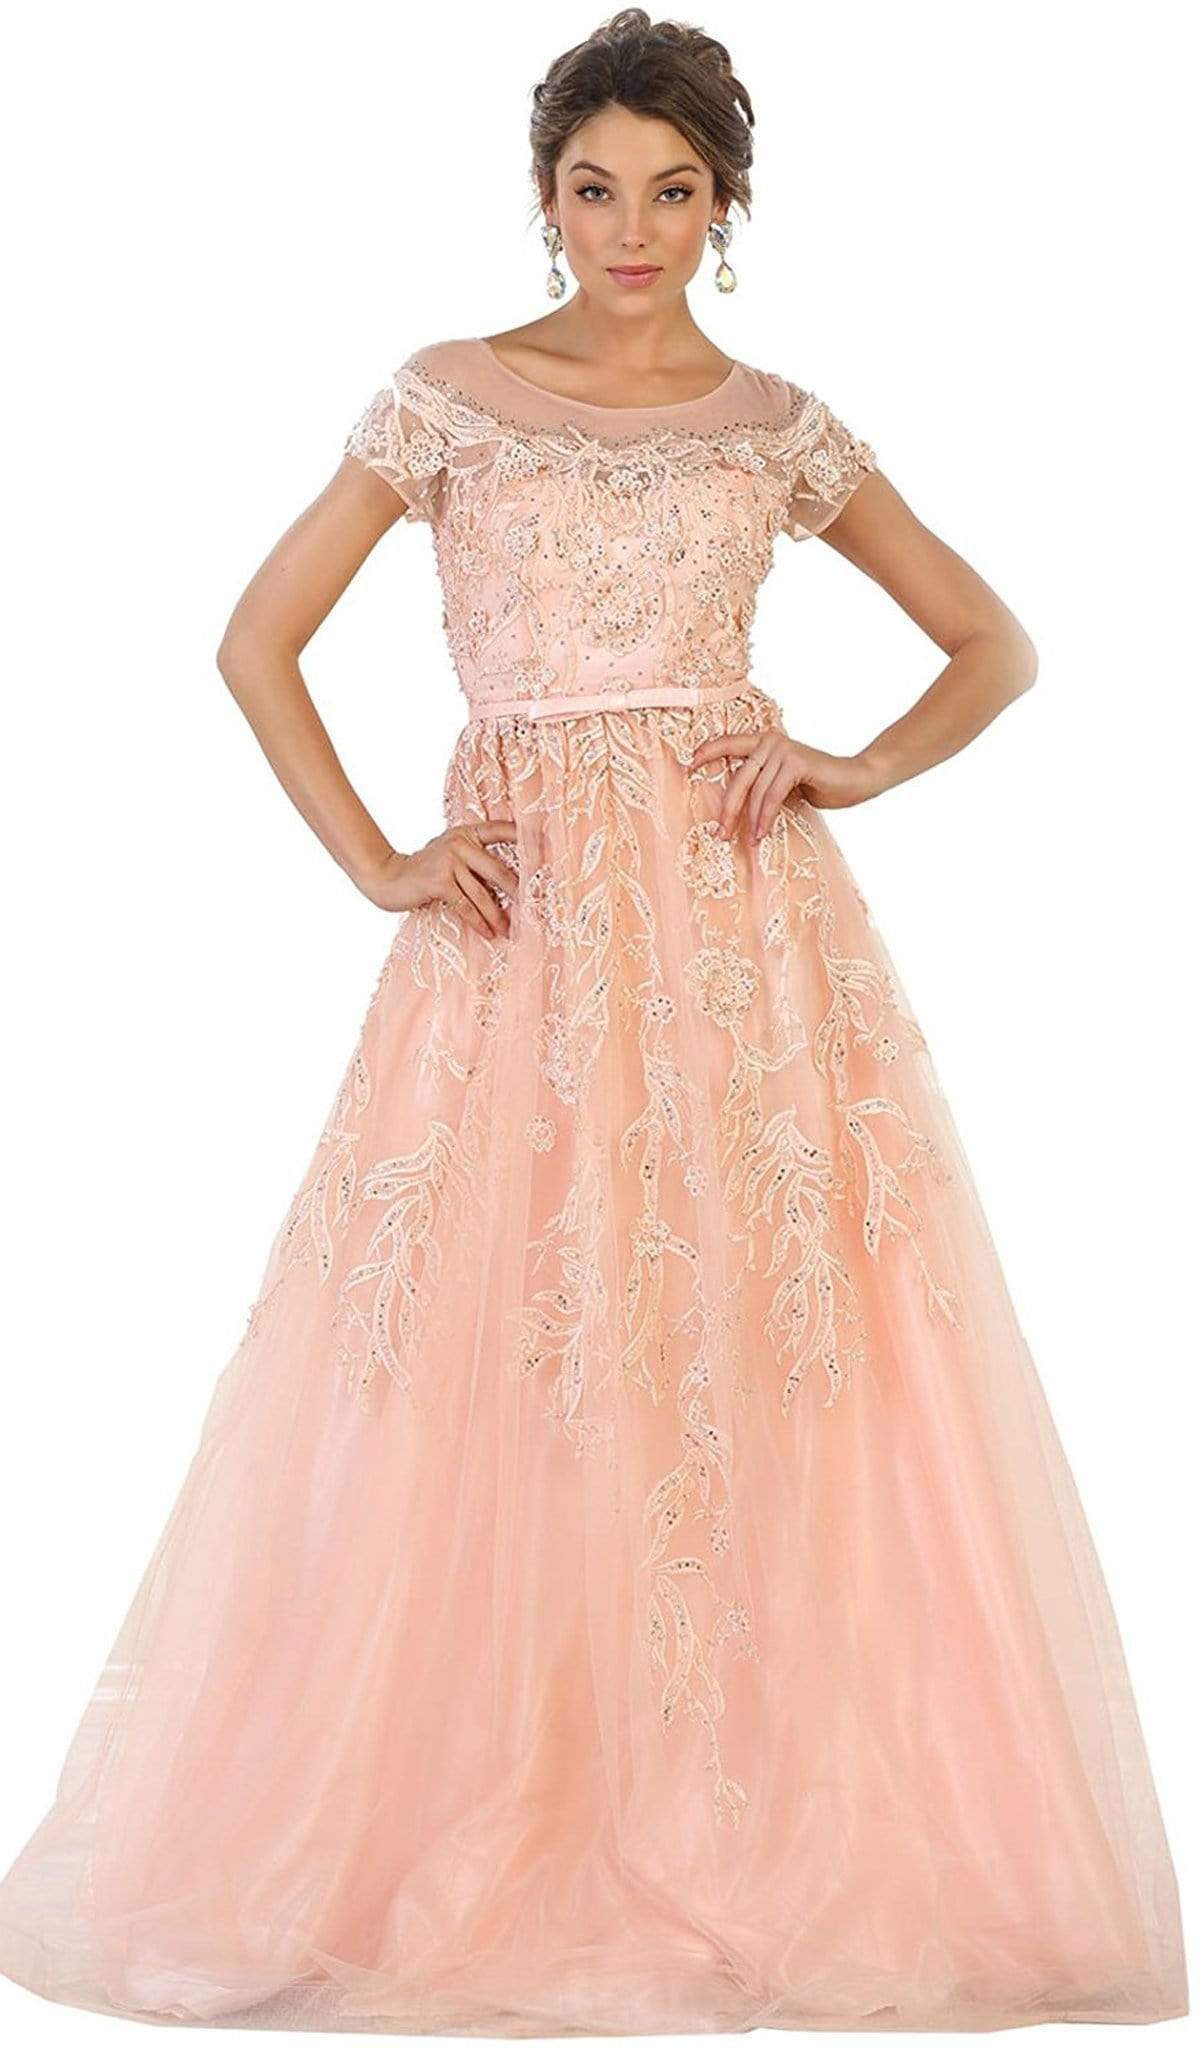 May Queen - Shimmering Illusion Scoop Neck A-line Evening Gown Special Occasion Dress 4 / Blush